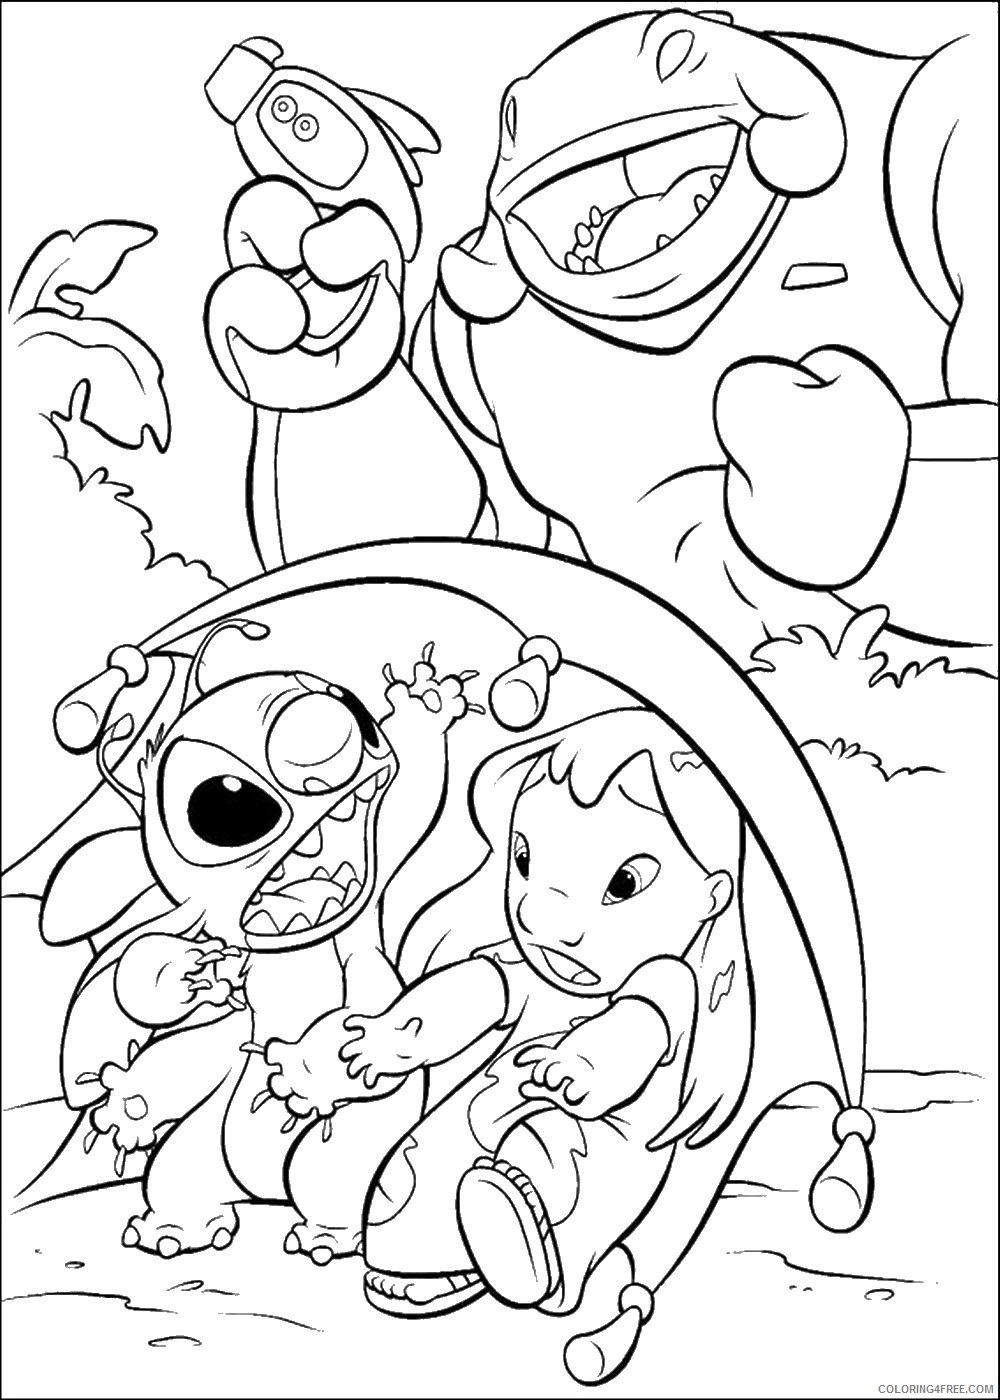 Lilo and Stitch Coloring Pages Cartoons lilo_and_stitch_cl_29 Printable 2020 3805 Coloring4free